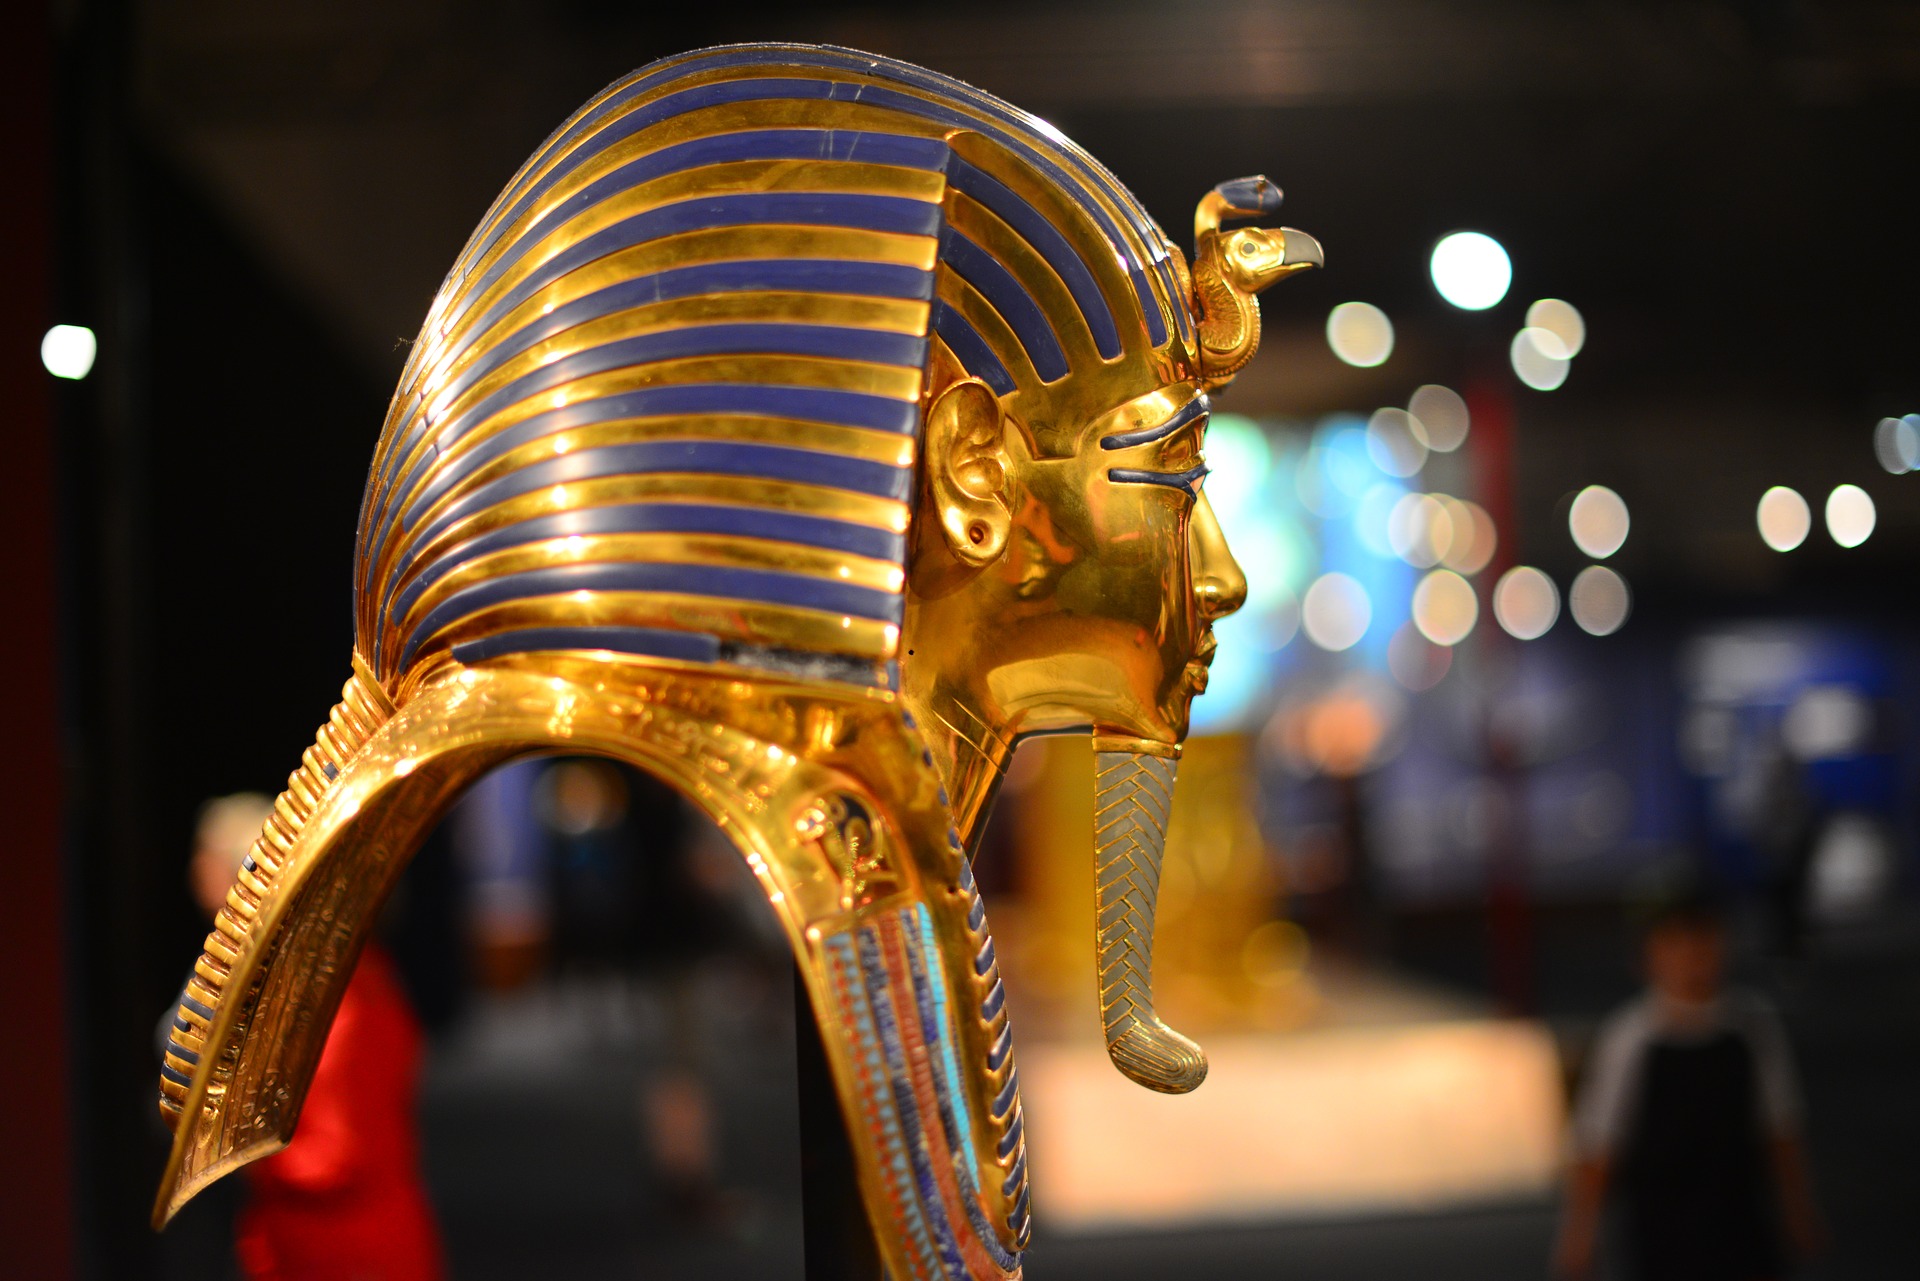 One of the world's tourist icons is represented in Egypt